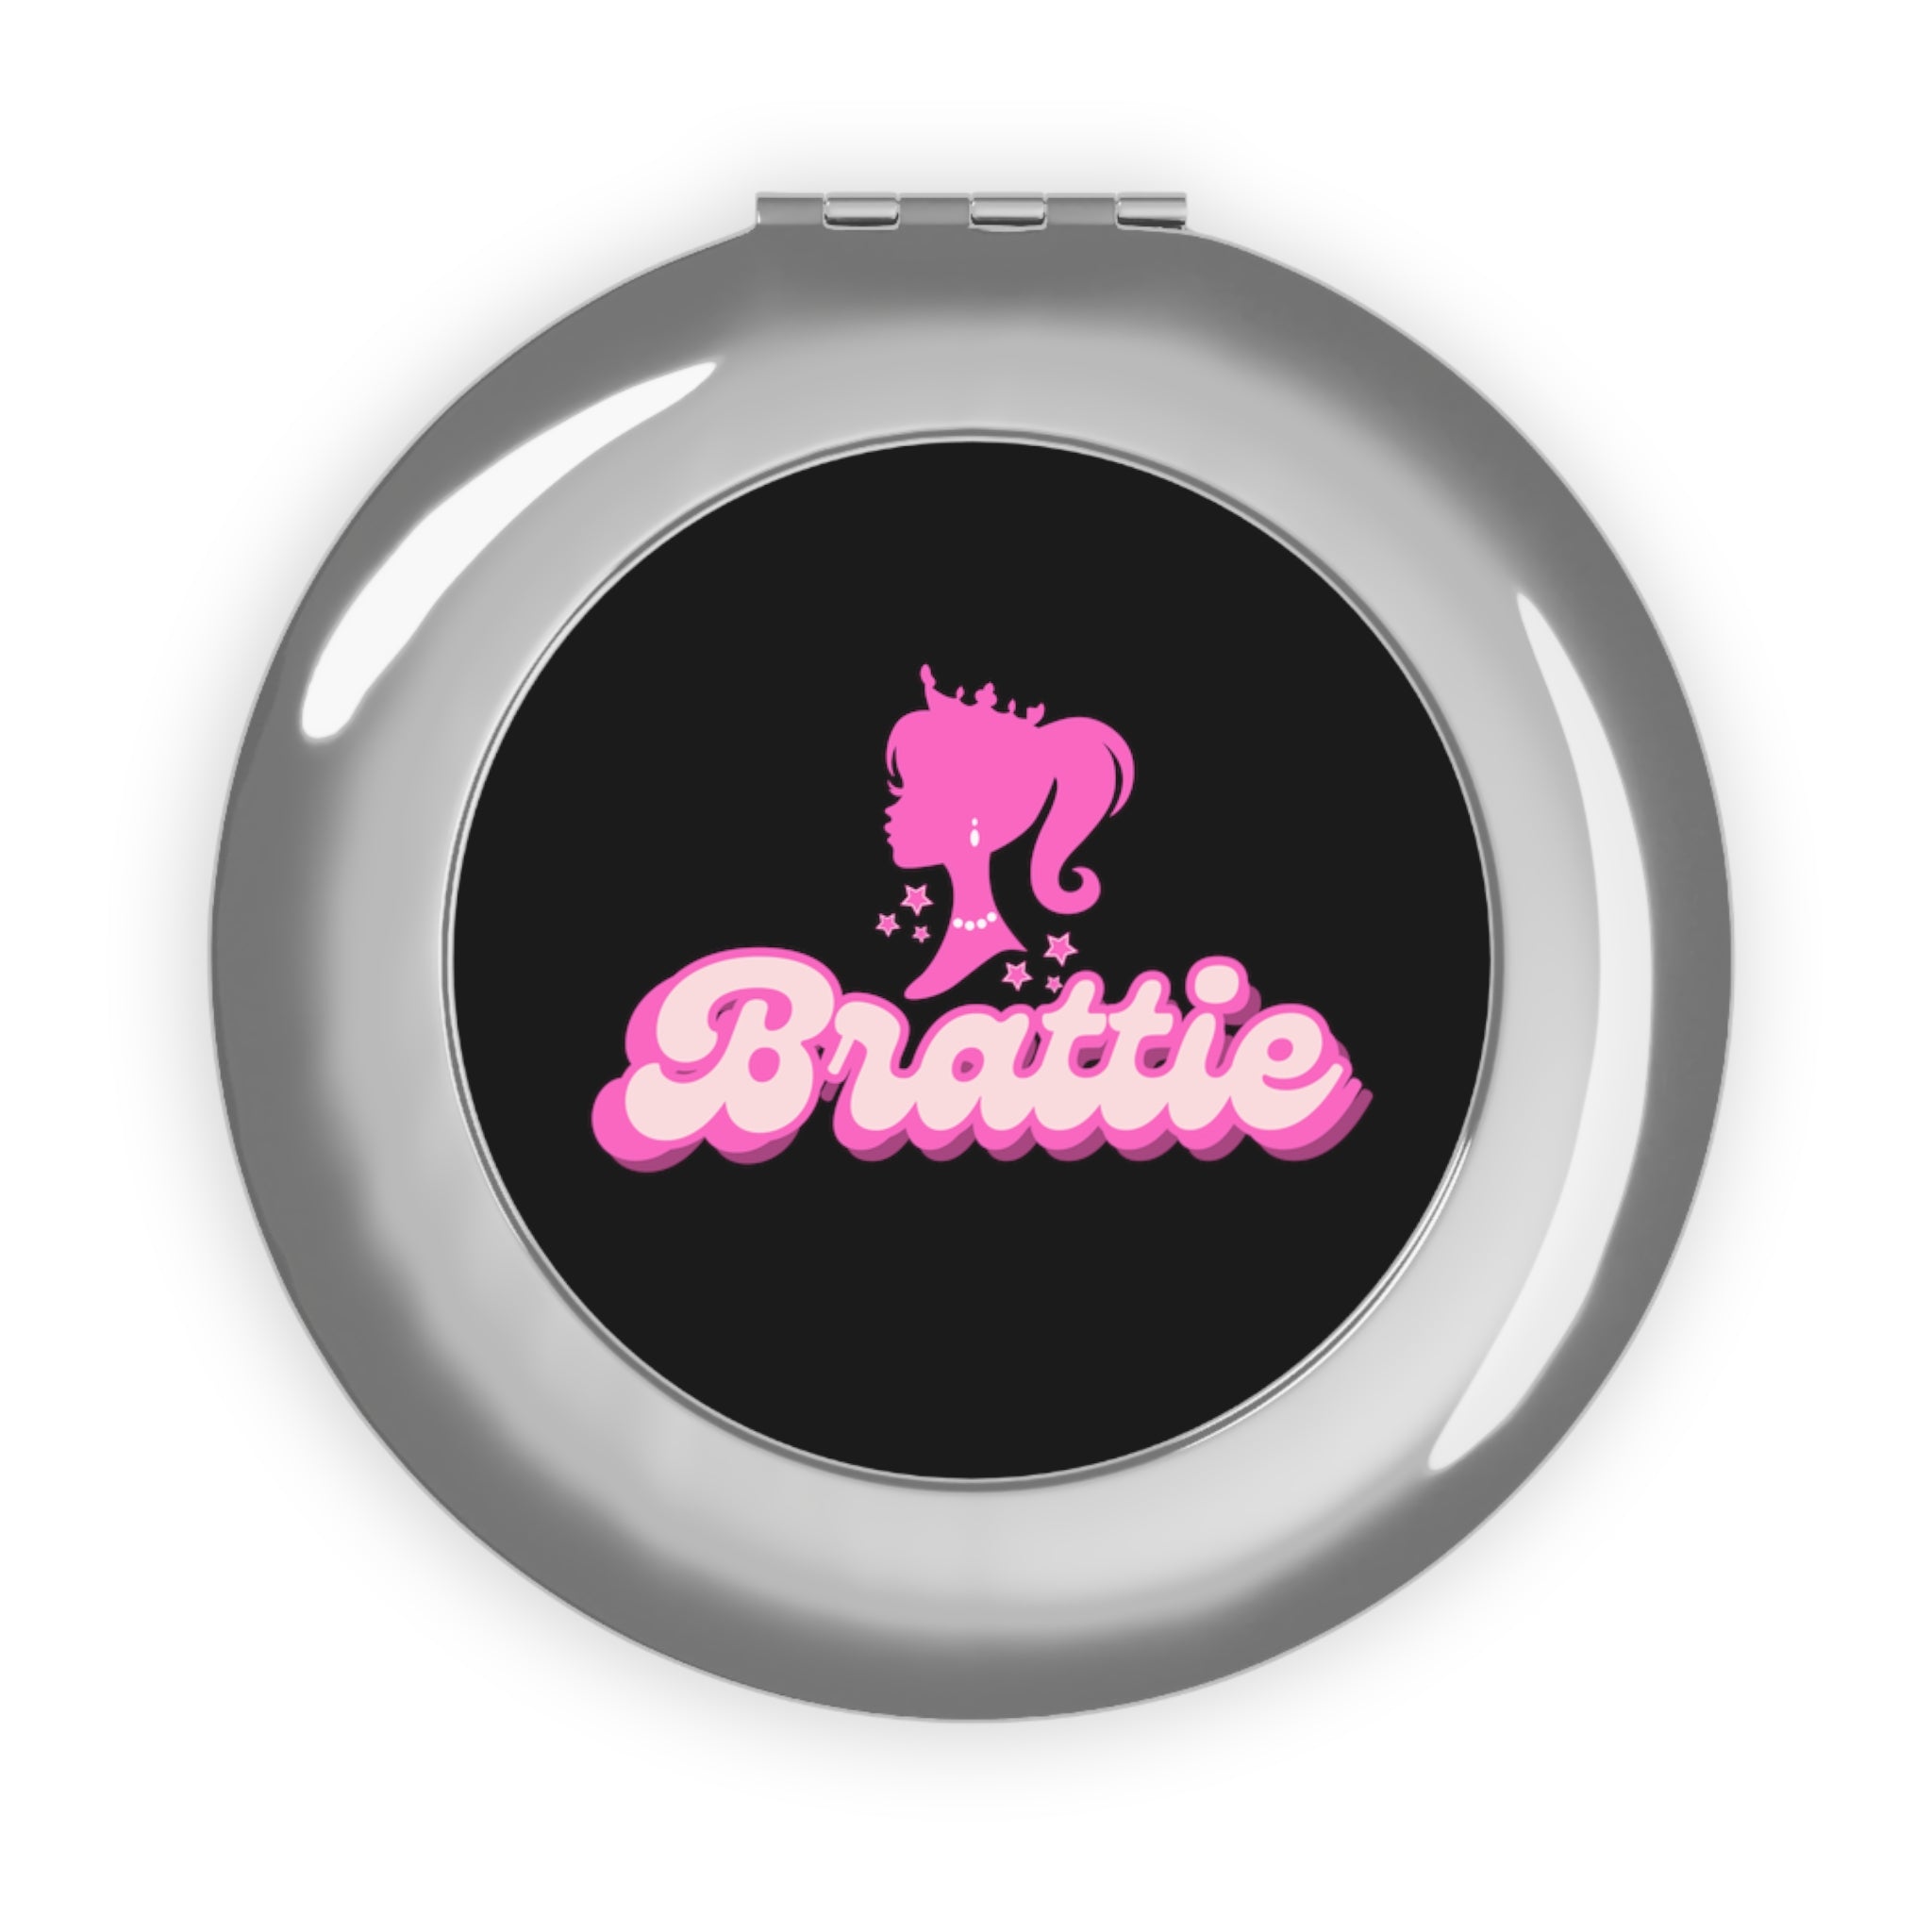 Barbie-Themed Brattie (Silhouette) Compact Travel Mirror Accessories Silver-Glossy-One-size The Middle Aged Groove